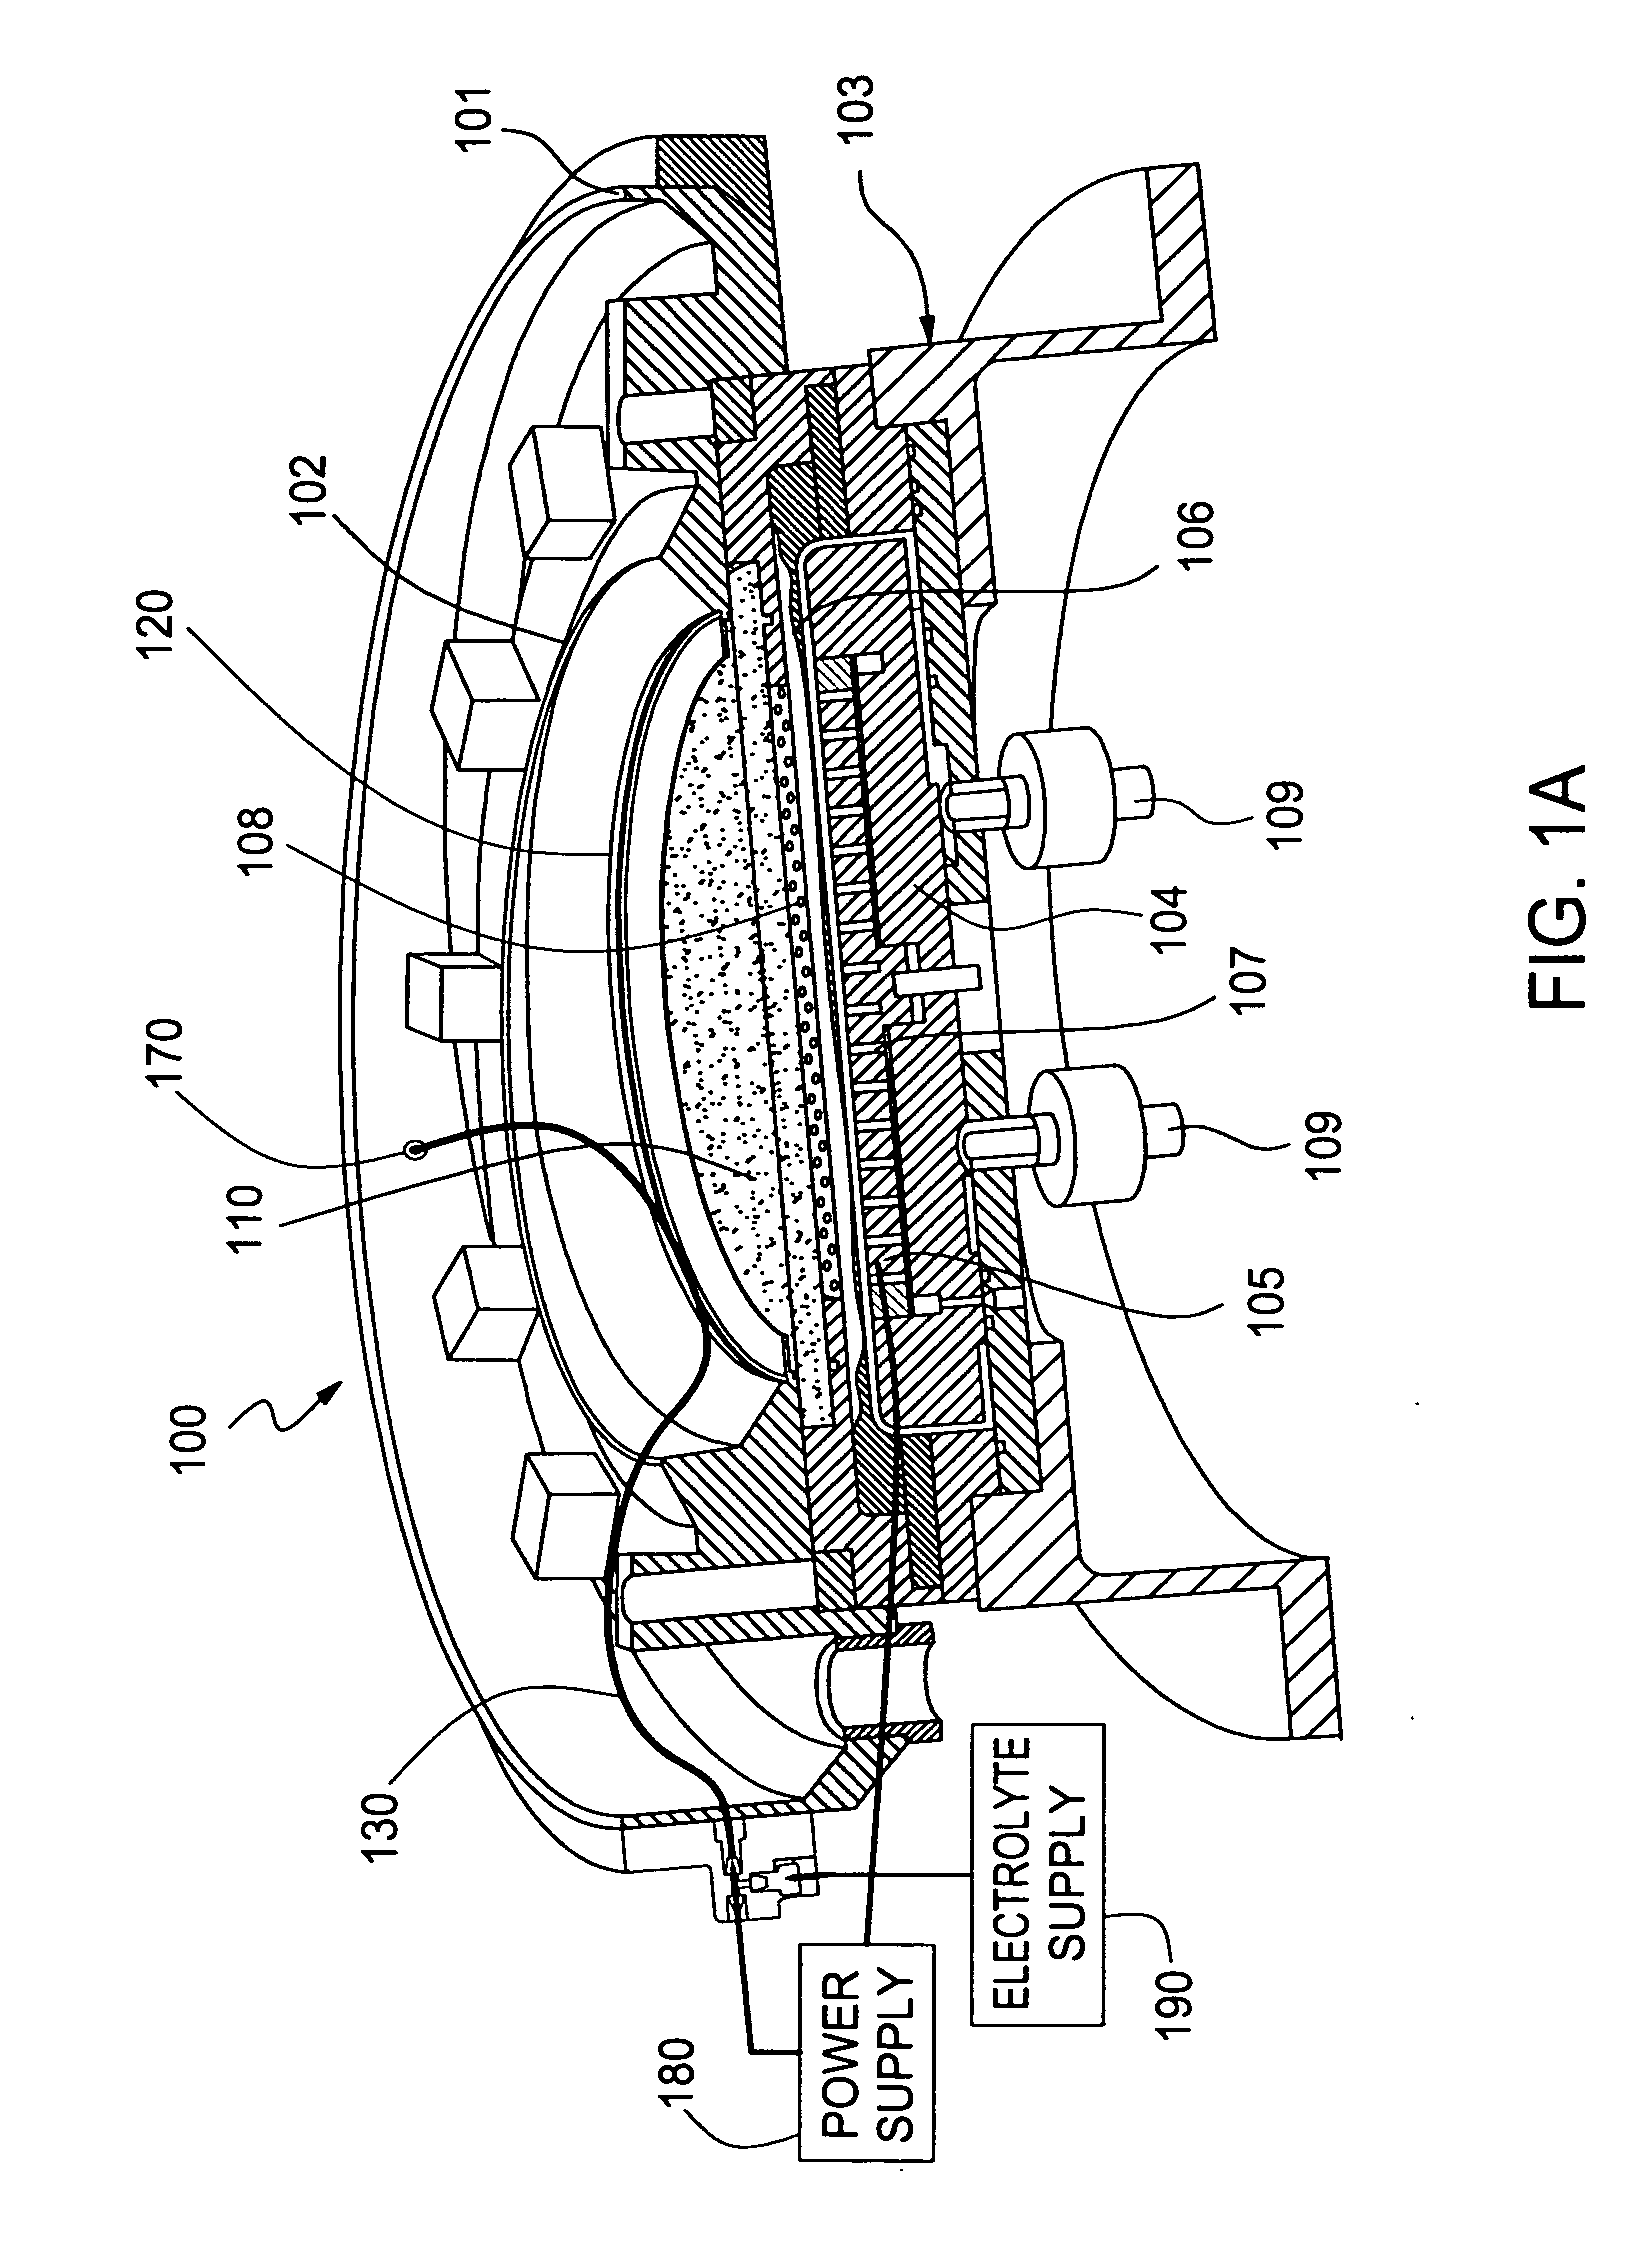 Apparatus and method for improving uniformity in electroplating